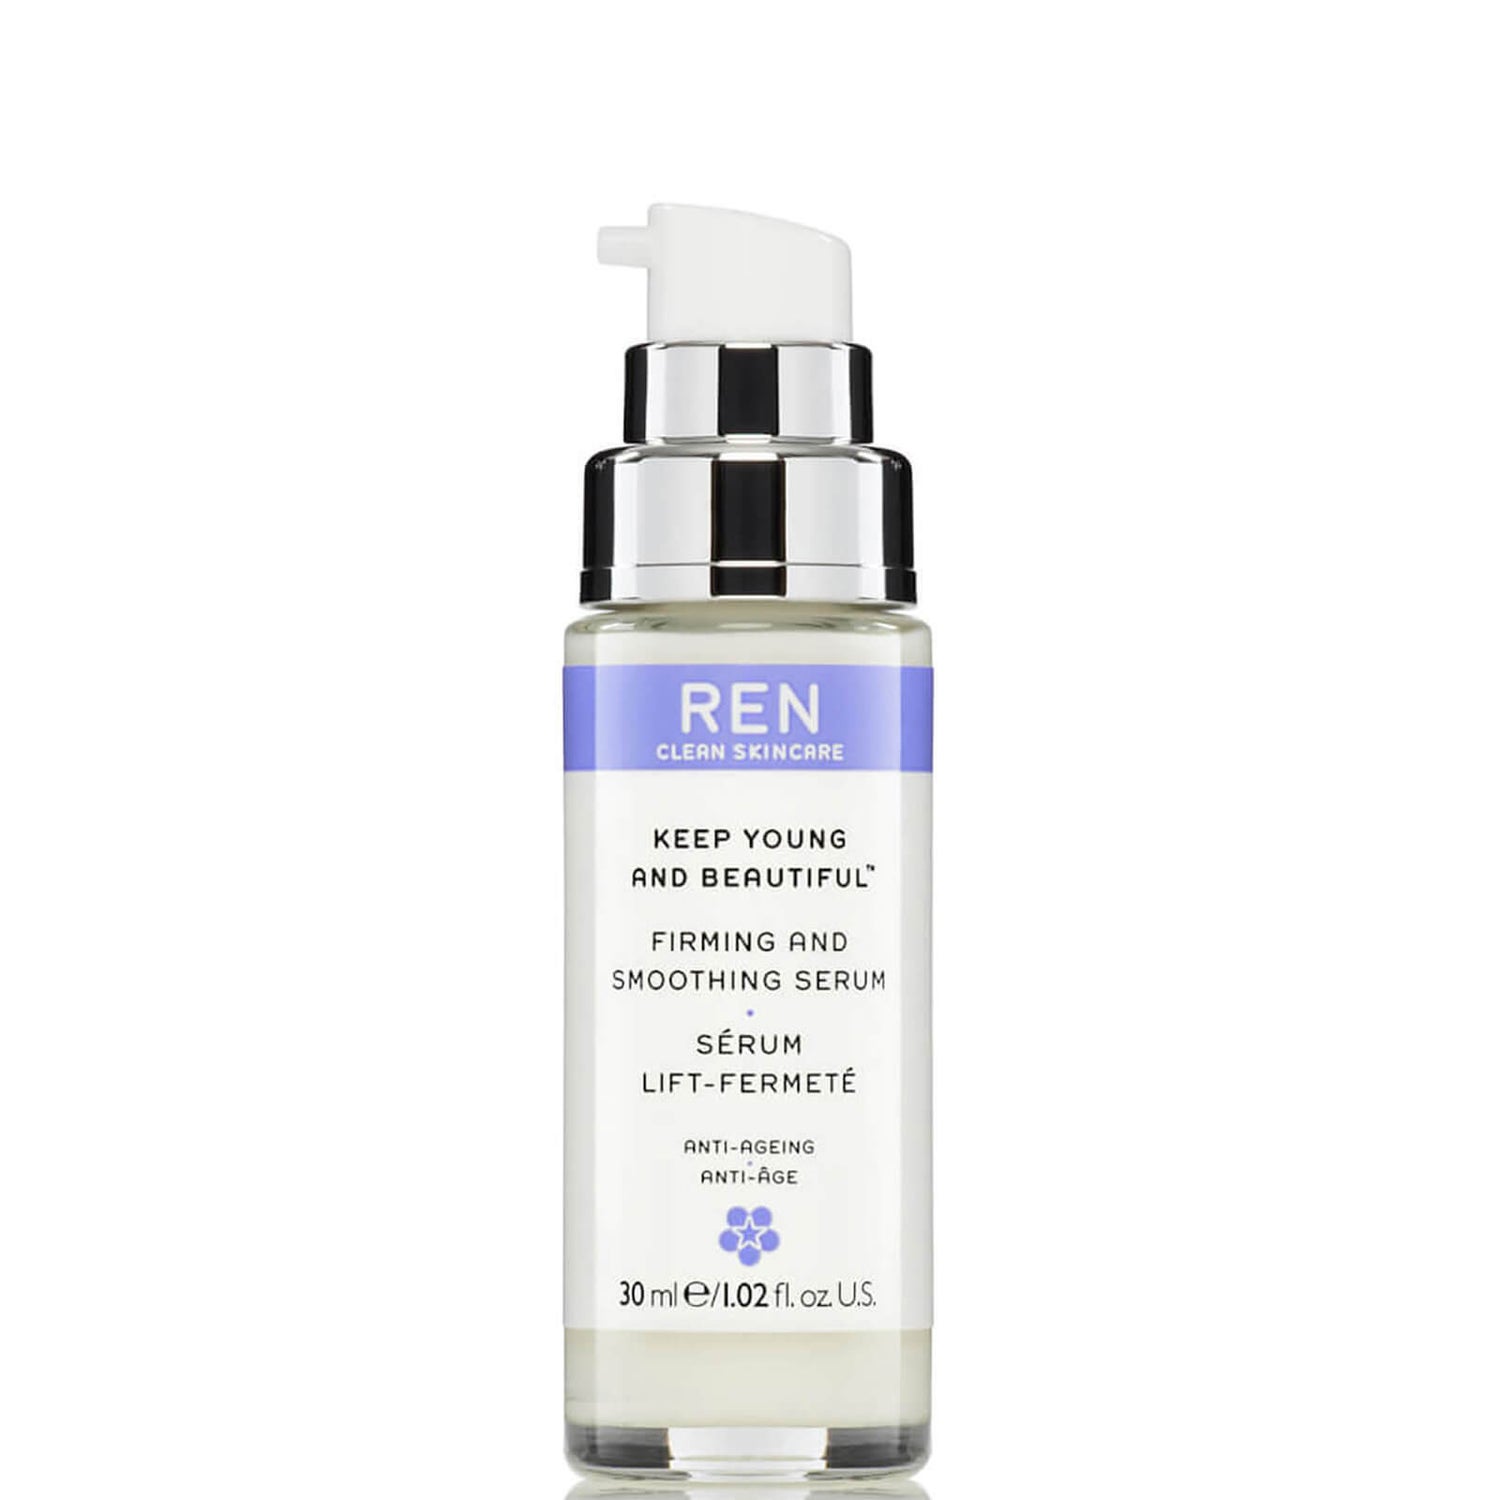 REN Clean Skincare Keep Young And Beautiful Firming And Smoothing Serum (1.02 fl. oz.)